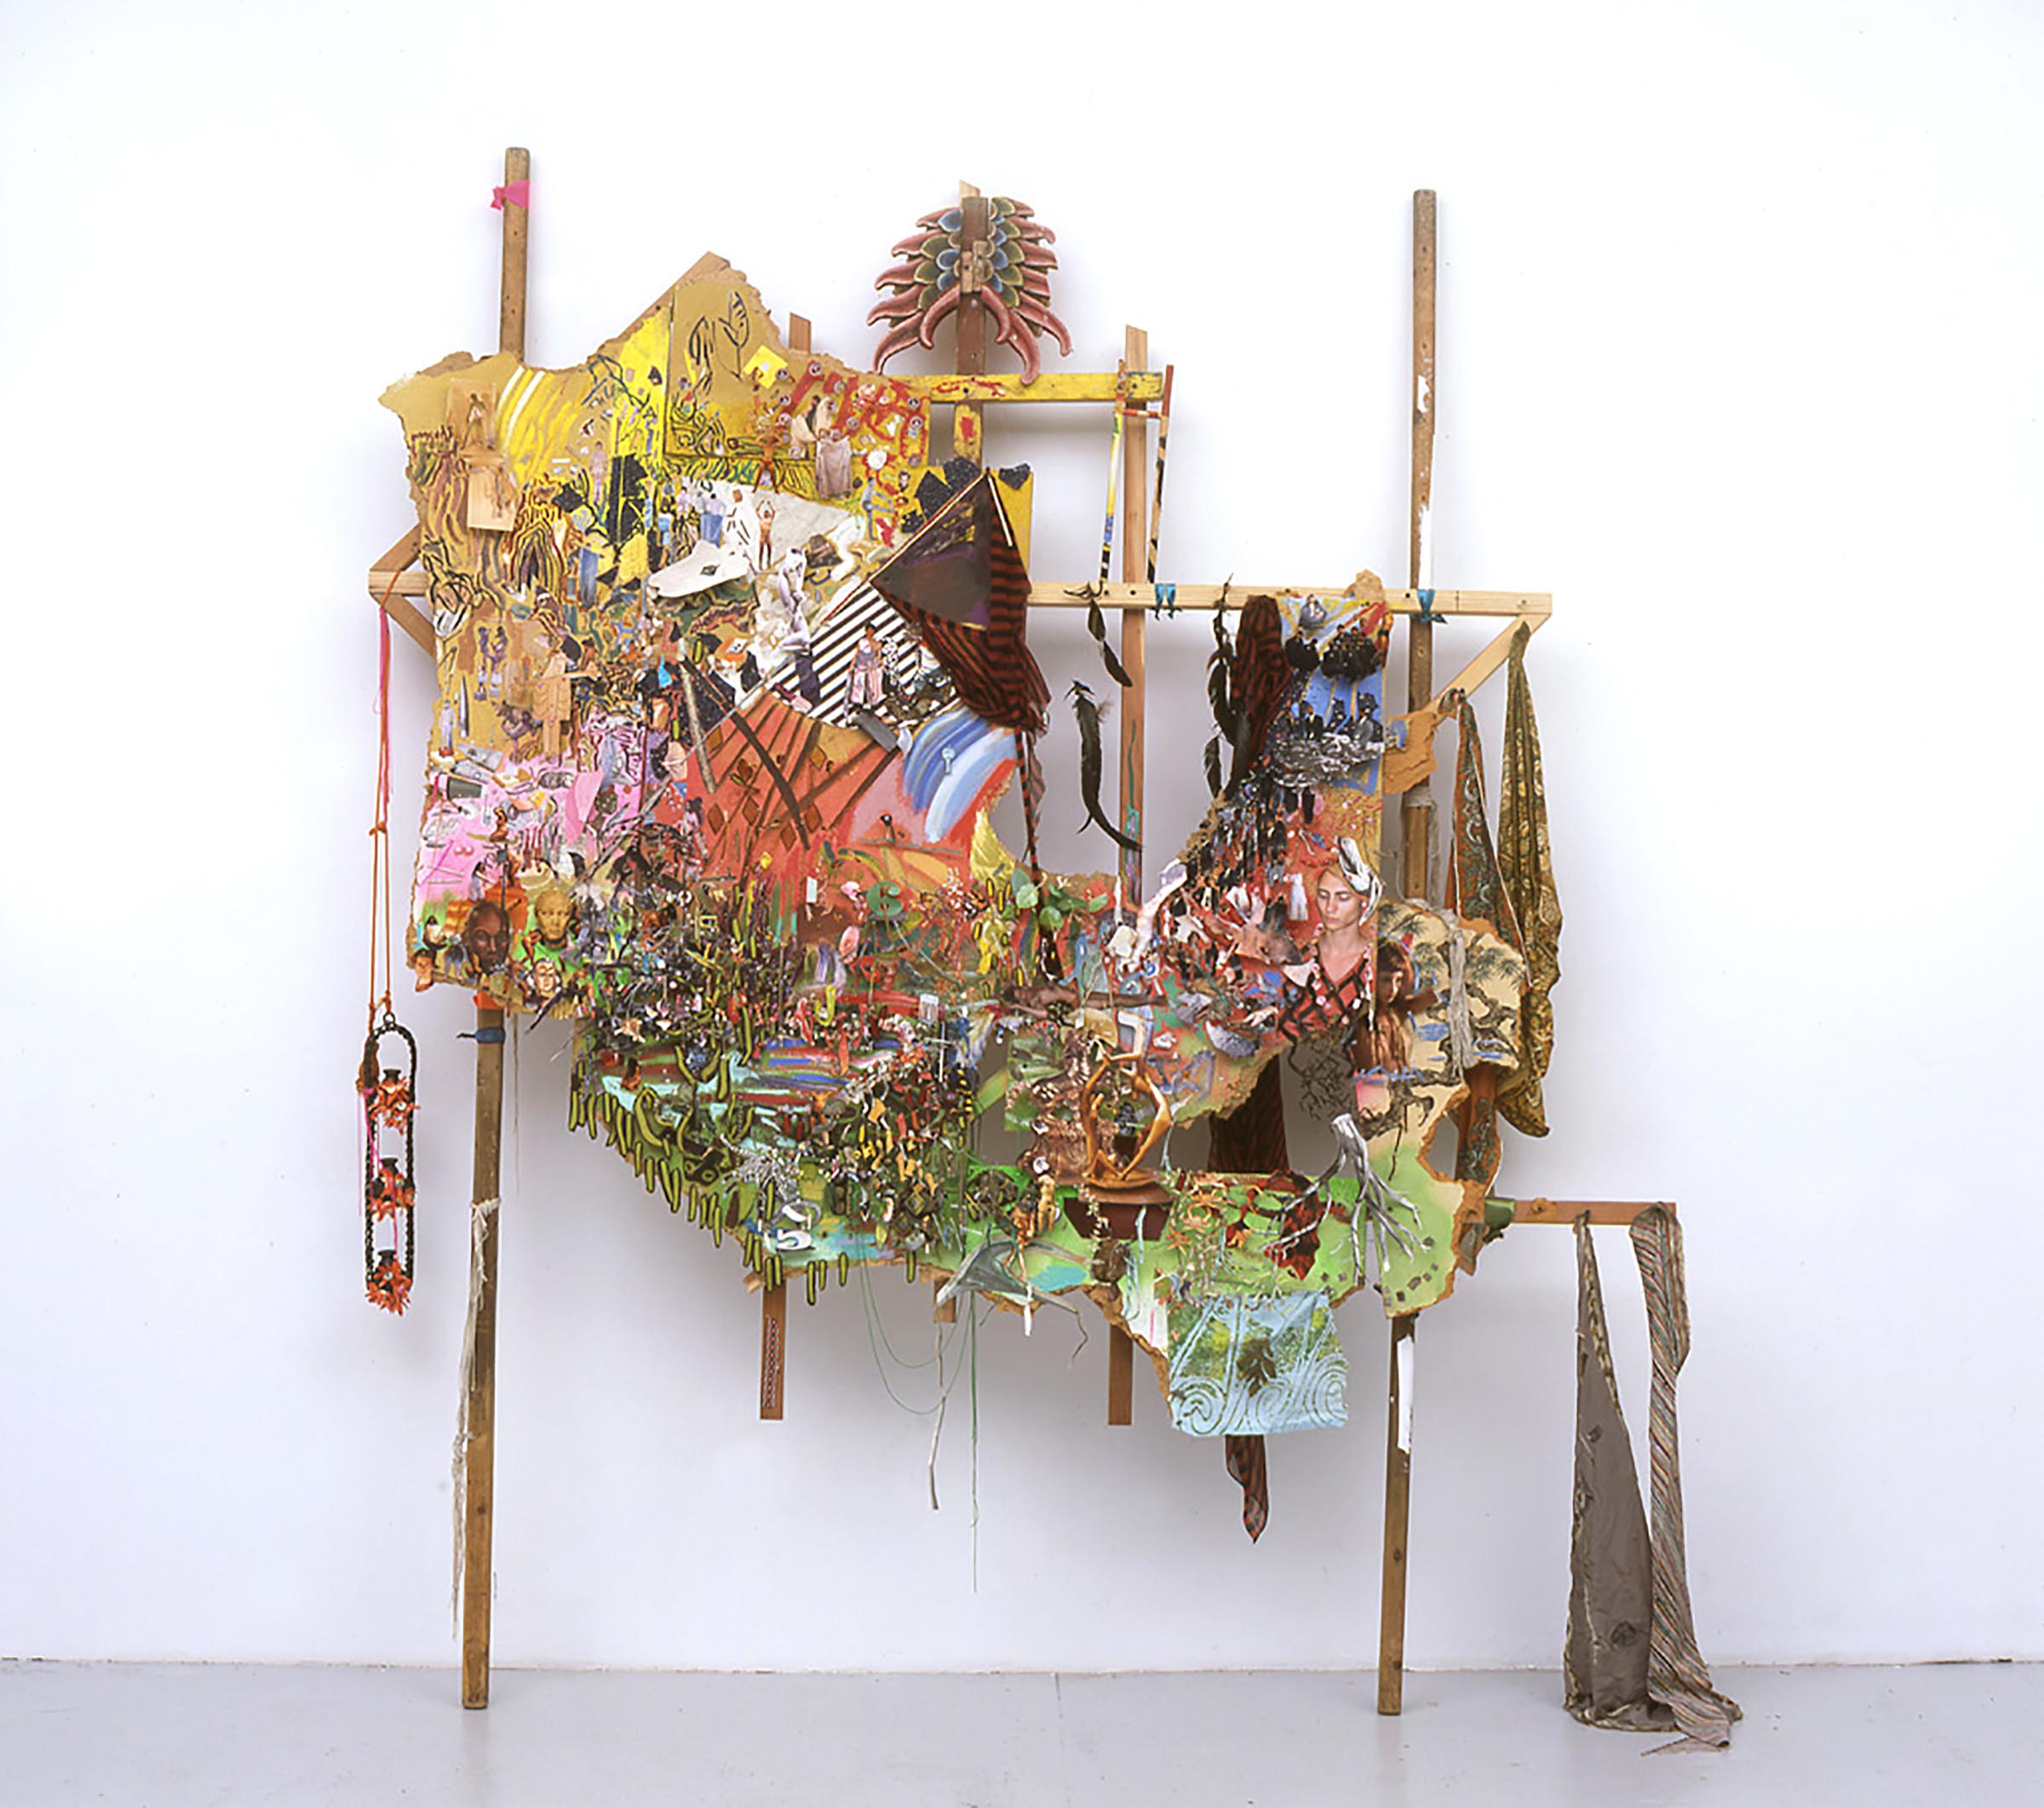 For the first of MOCA’s “Open House” artist-curated exhibitions, which began April 14, Elliott Hundley focused on assemblage, including his own 2006 work, Hyacinth.